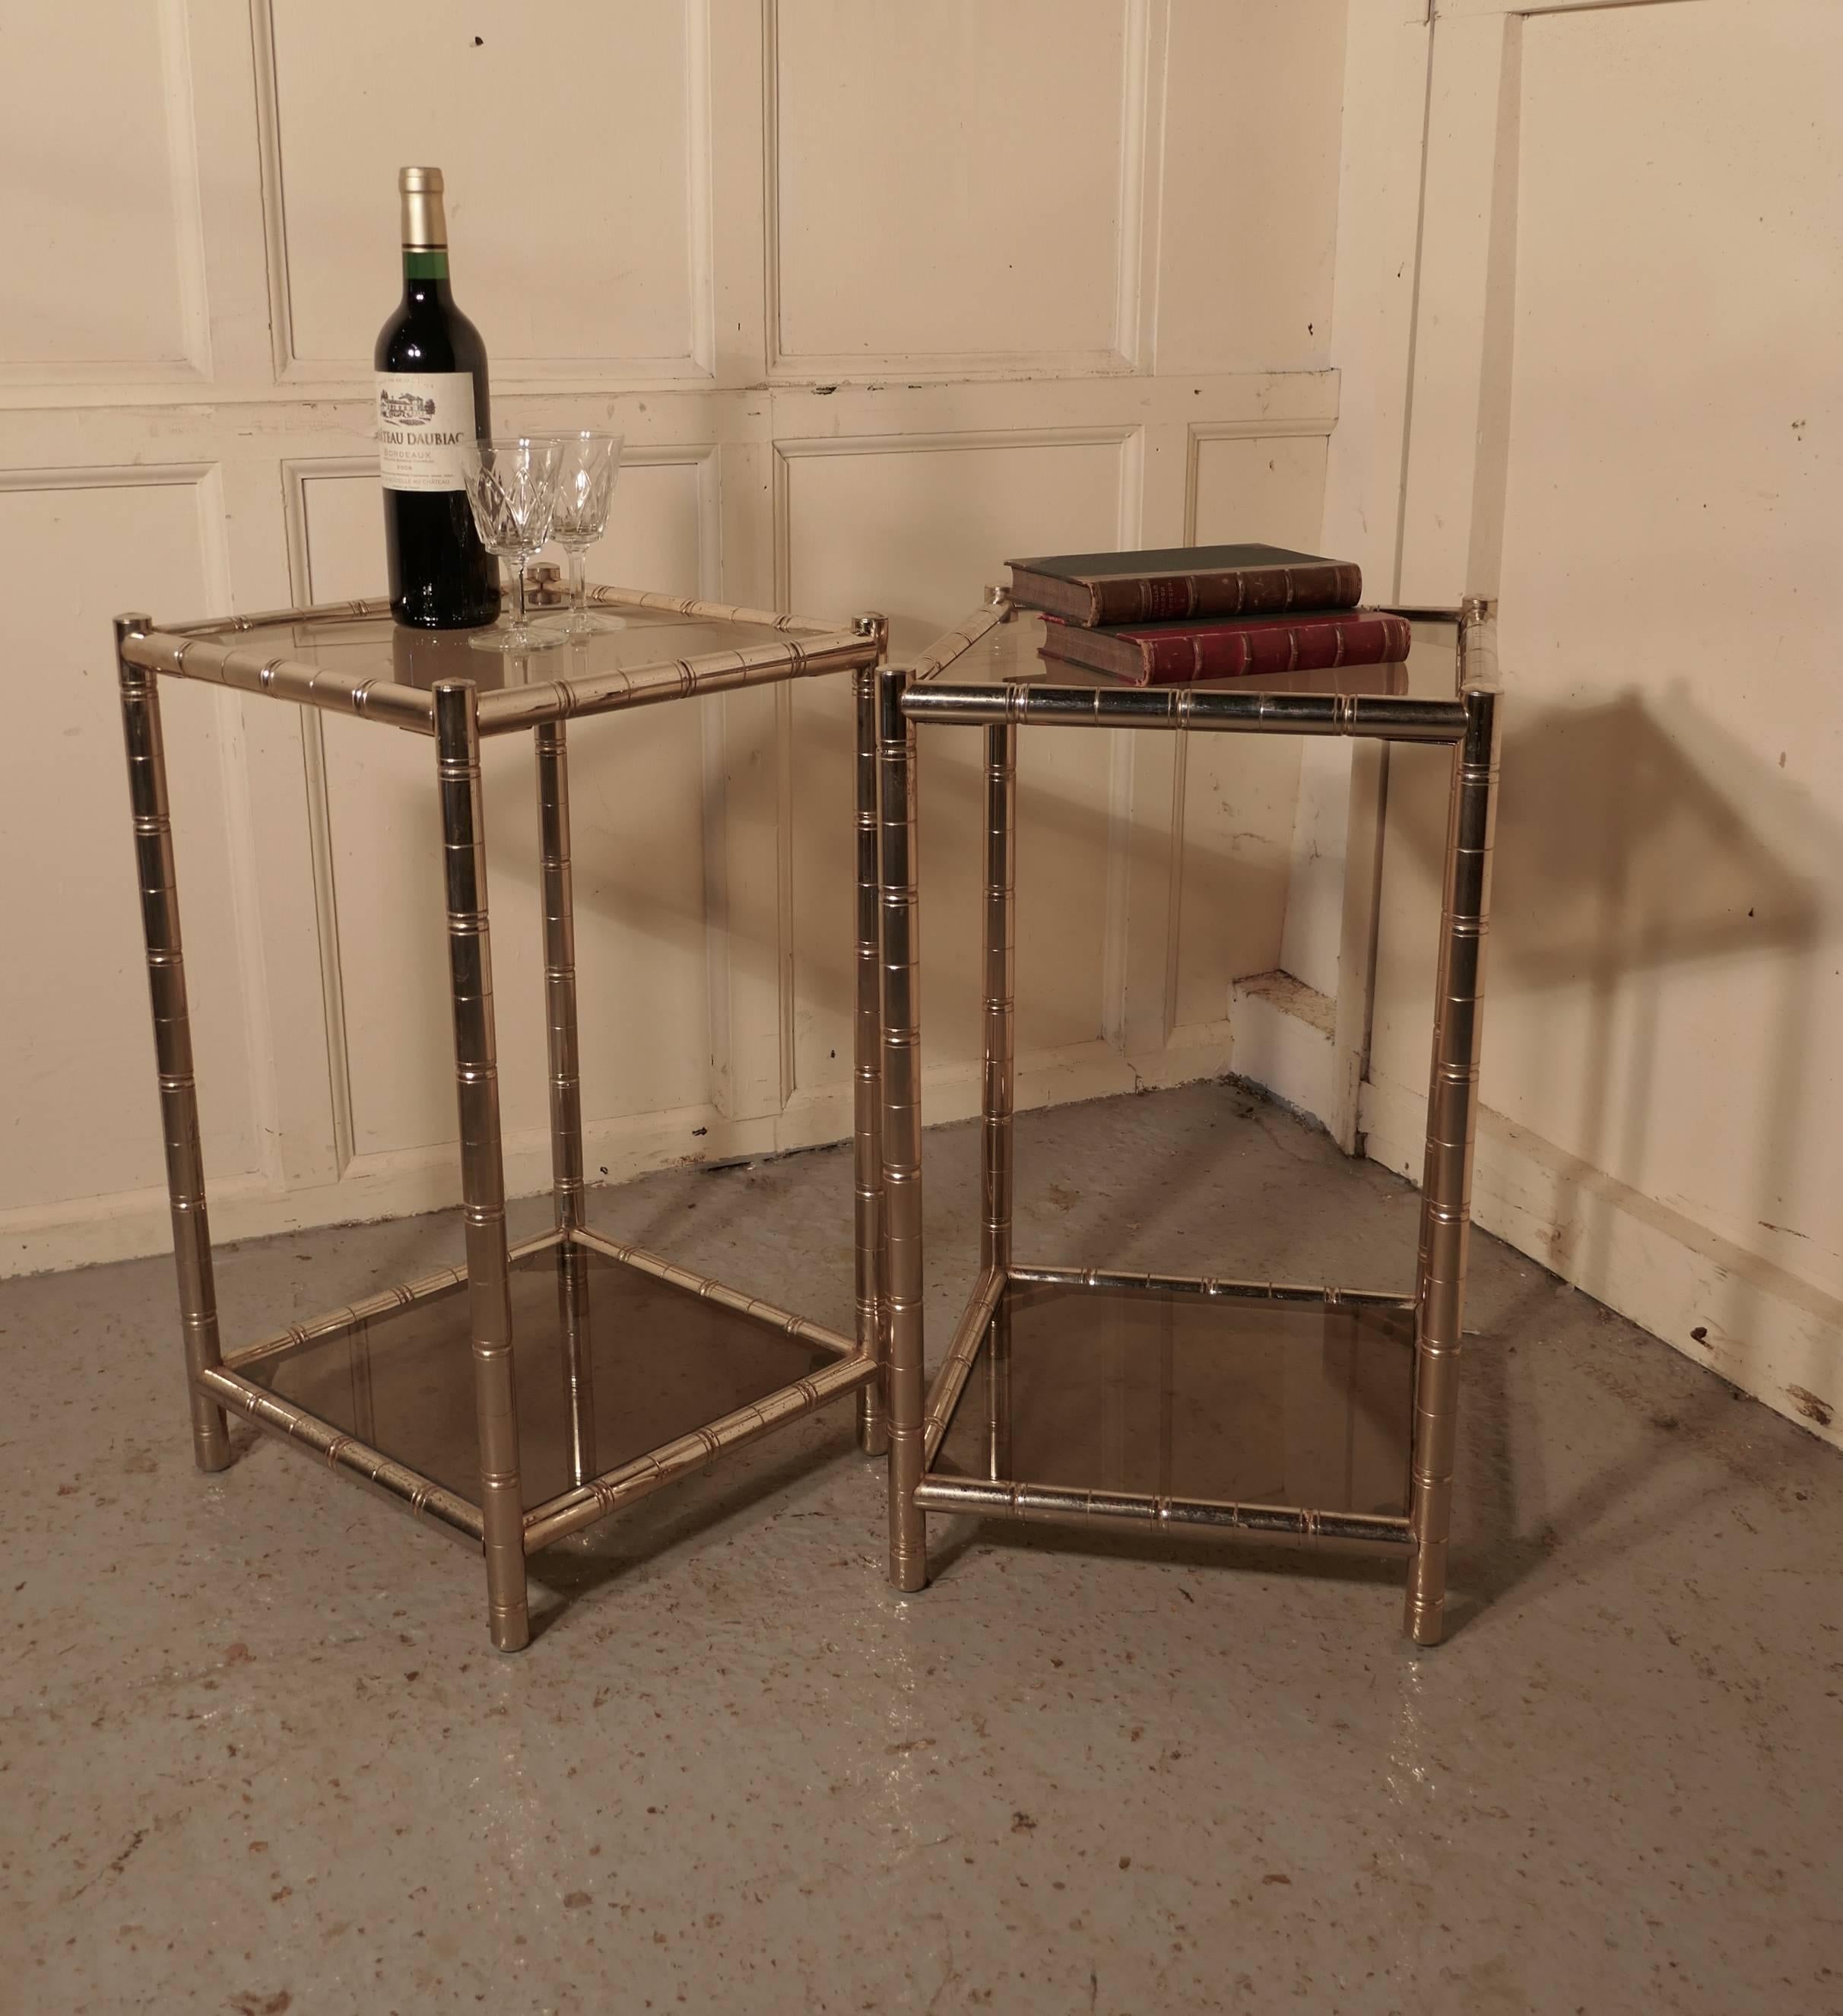 A pair of chrome Art Deco occasional tables or bedside tables

A useful pair of tables, they are made in chrome which has a simulated bamboo effect, both the top and the under tier are in smoked glass
The pair are in good condition with very